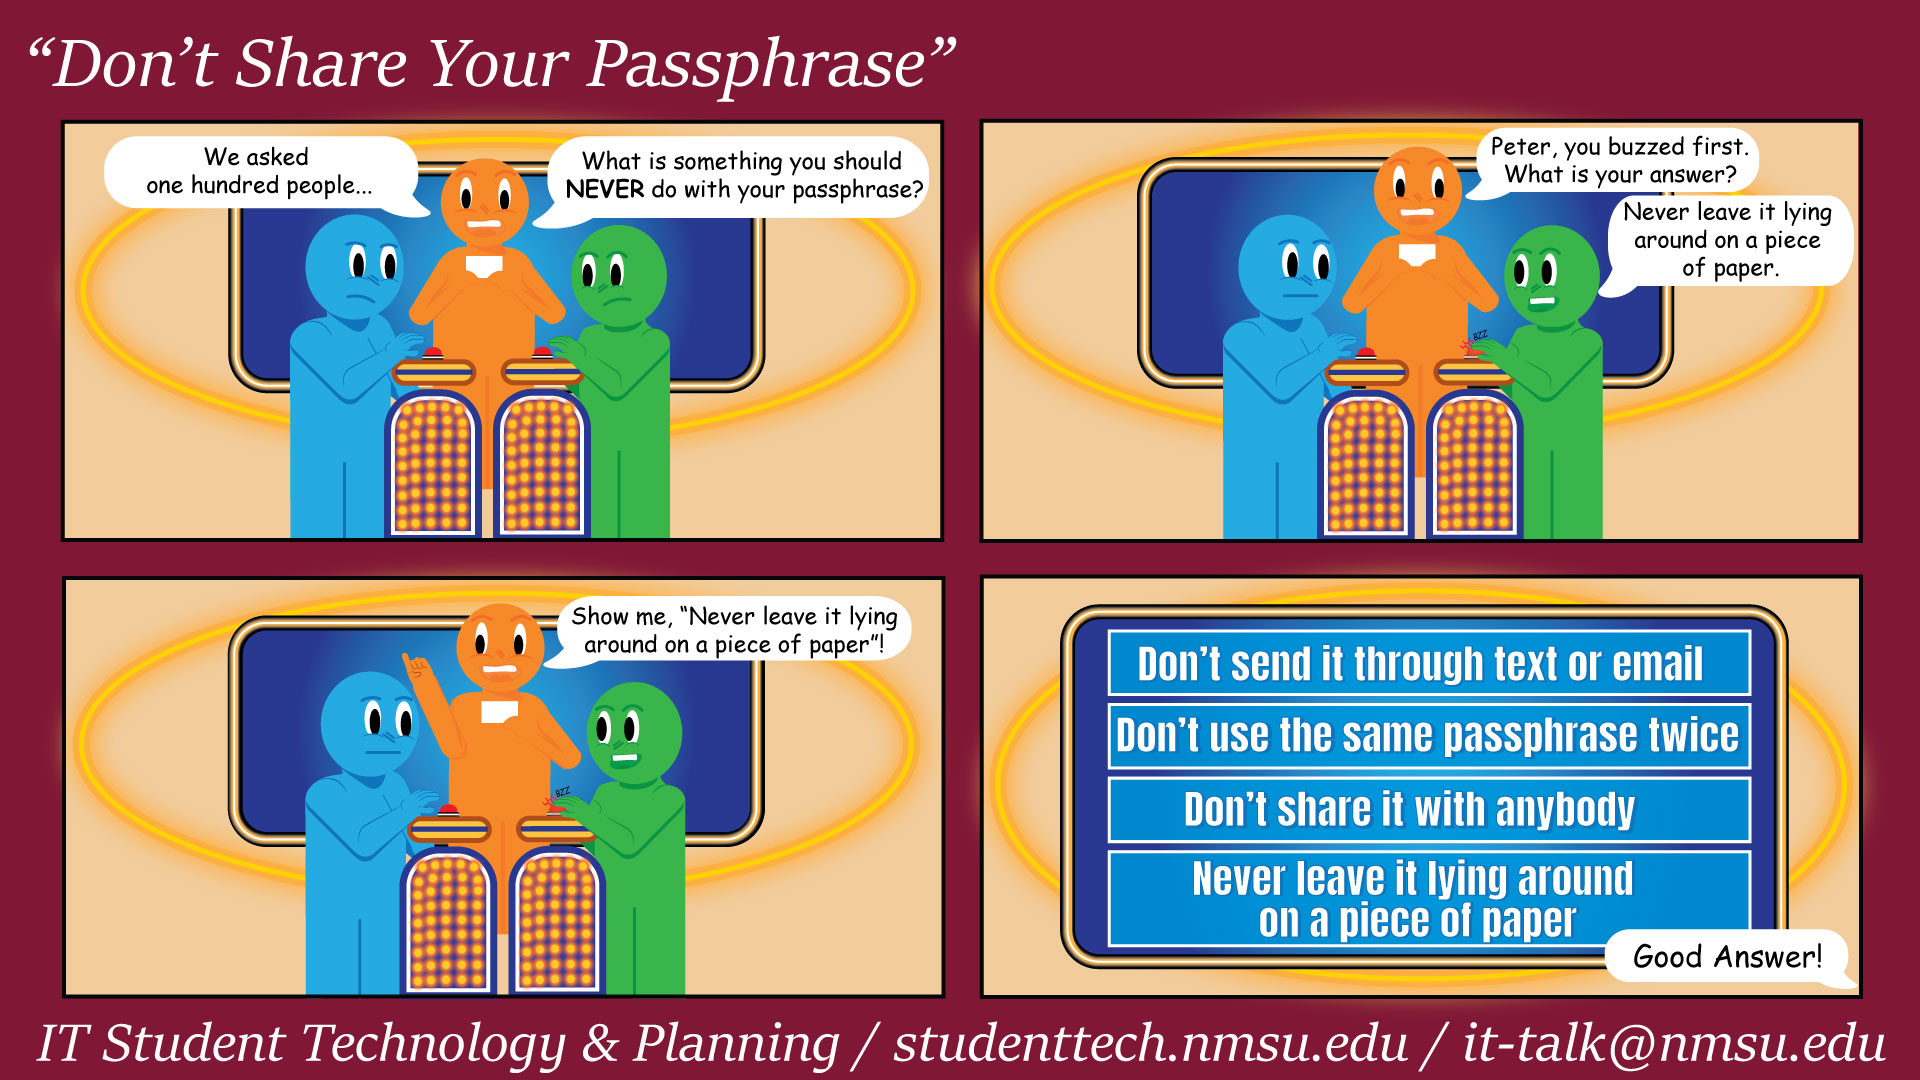 Do not share your passphrase with anybody. Do not send your passphrase through text or email. Do not use the same passphrase twice. Do not leave your passphrase lying around on a piece of paper.